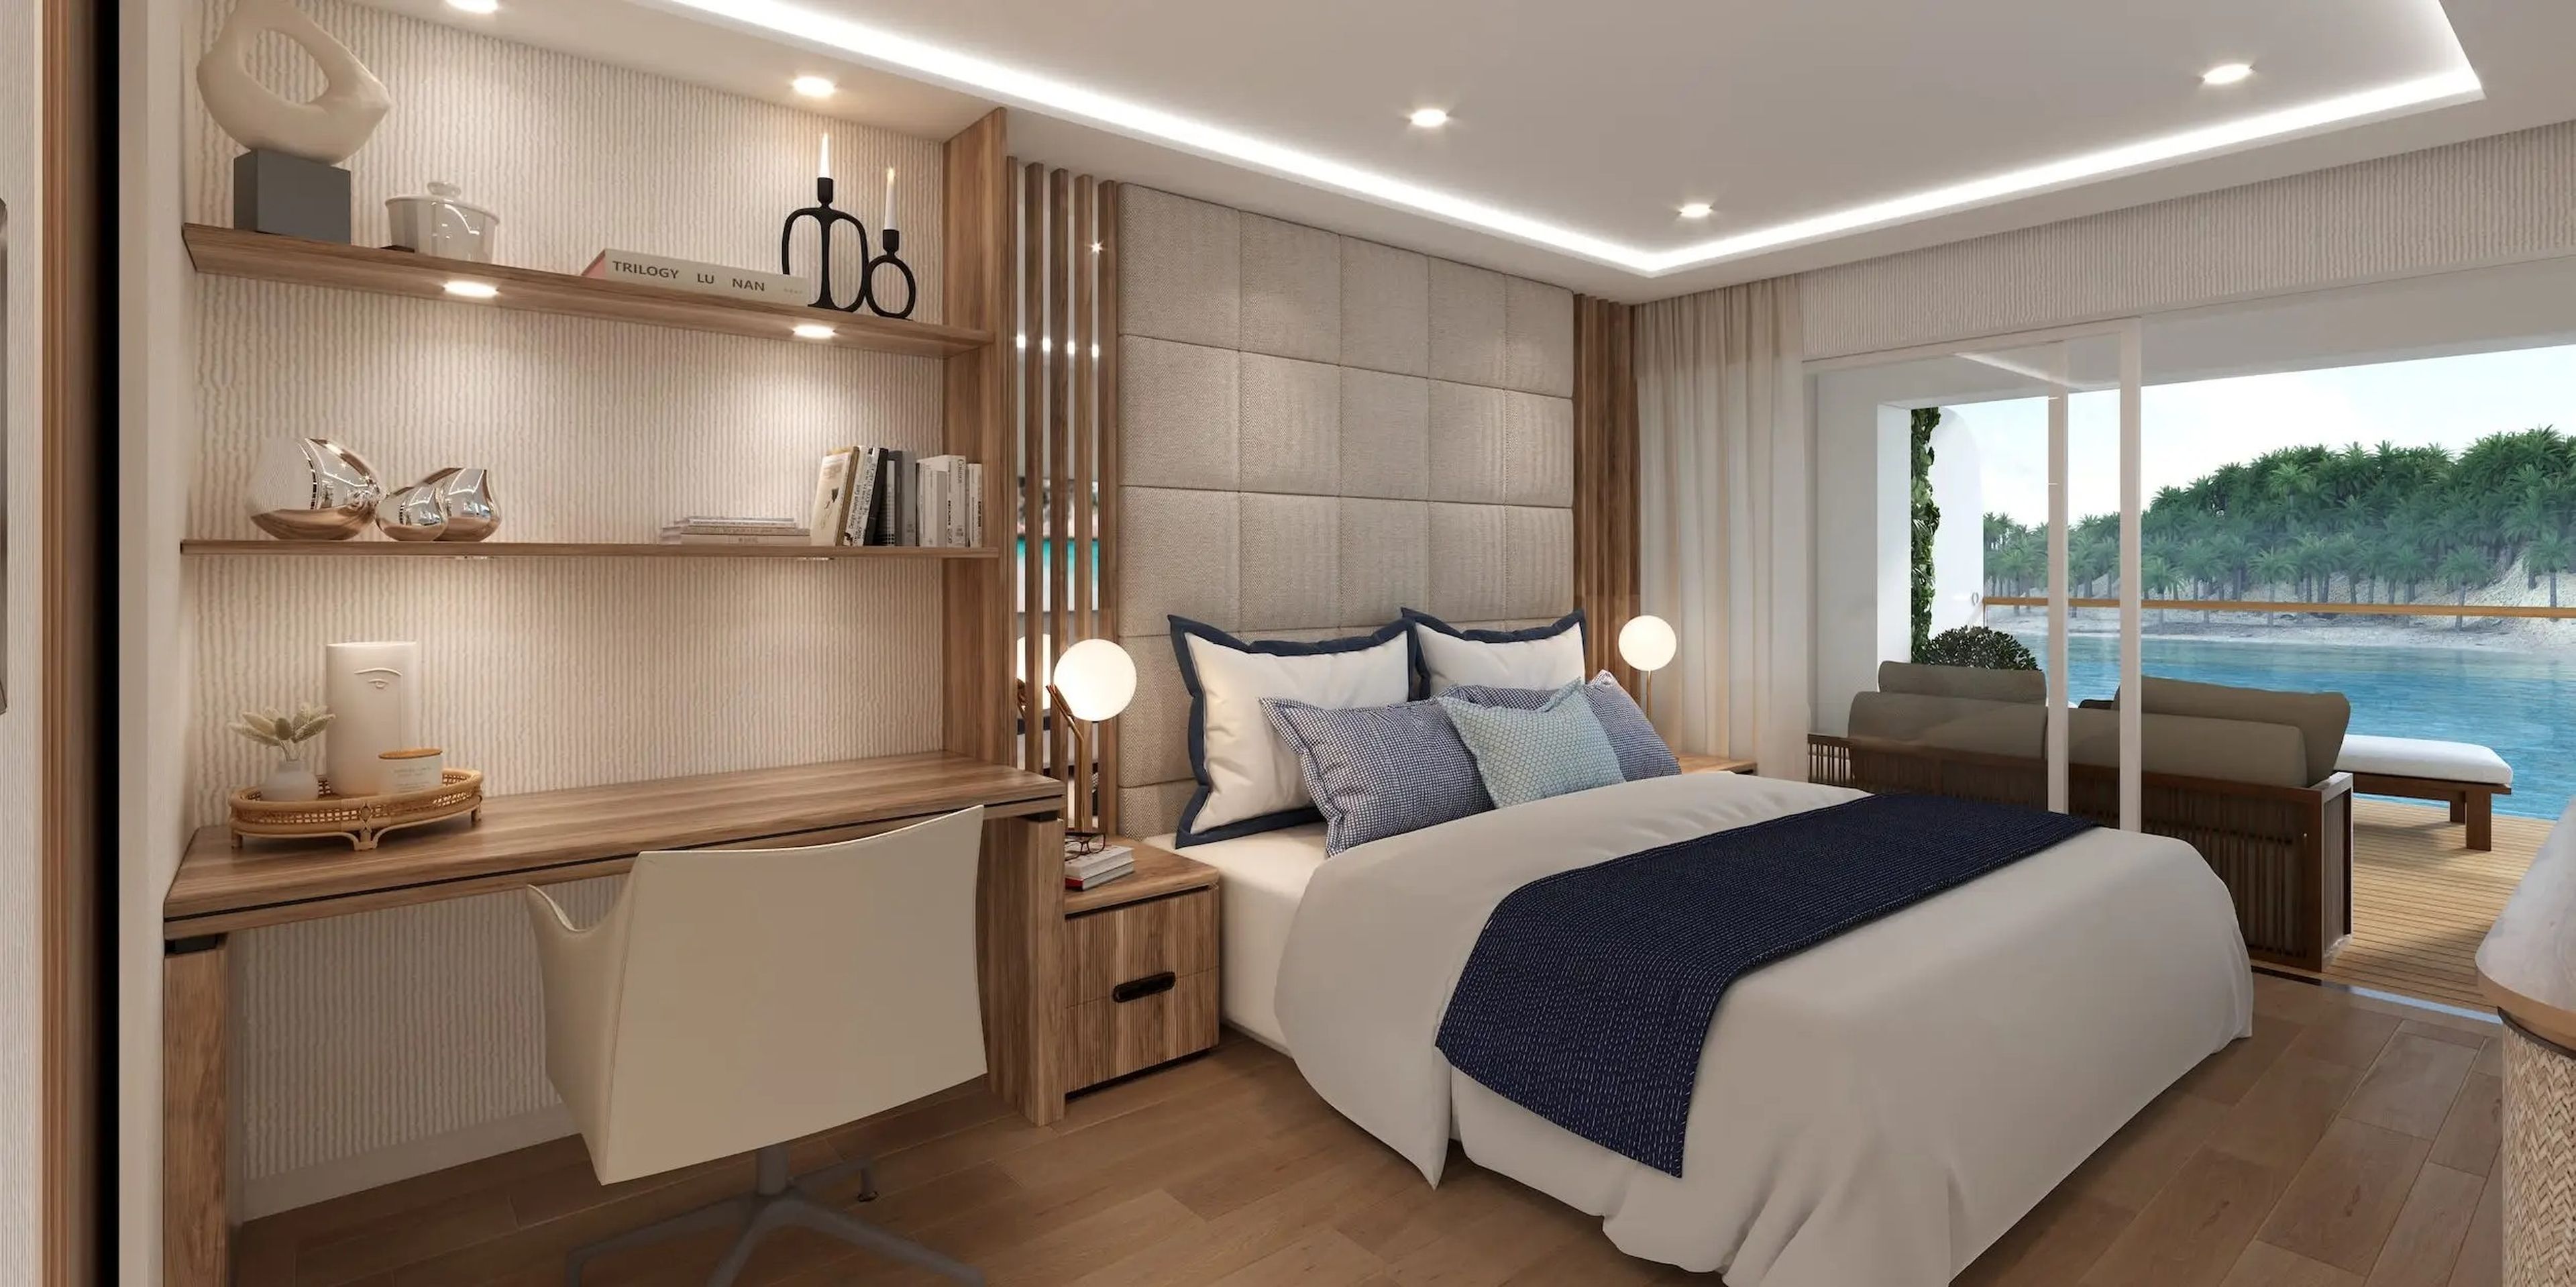 A rendering of the bedroom in Storylines' MV Narrative cruise ship.